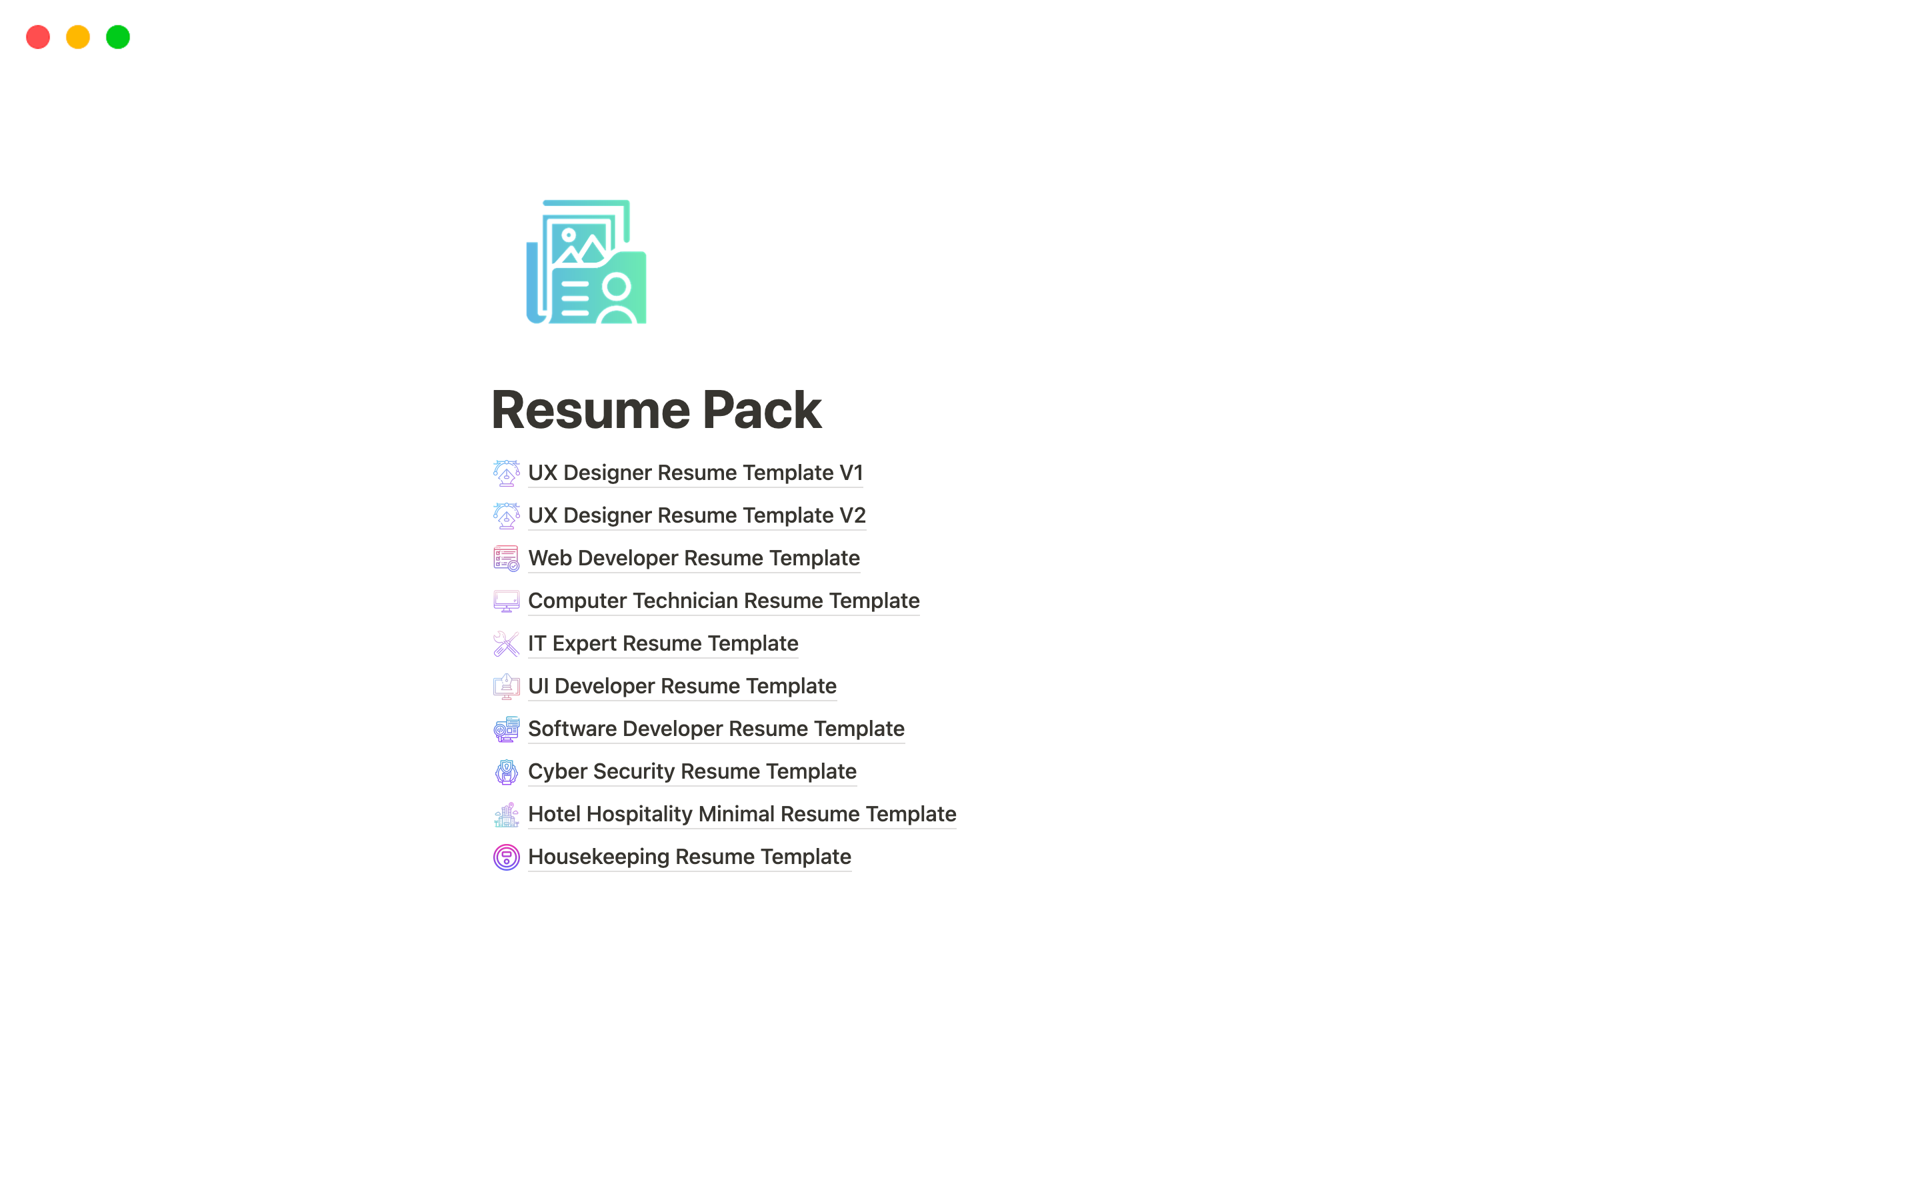 A template preview for Resume Pack